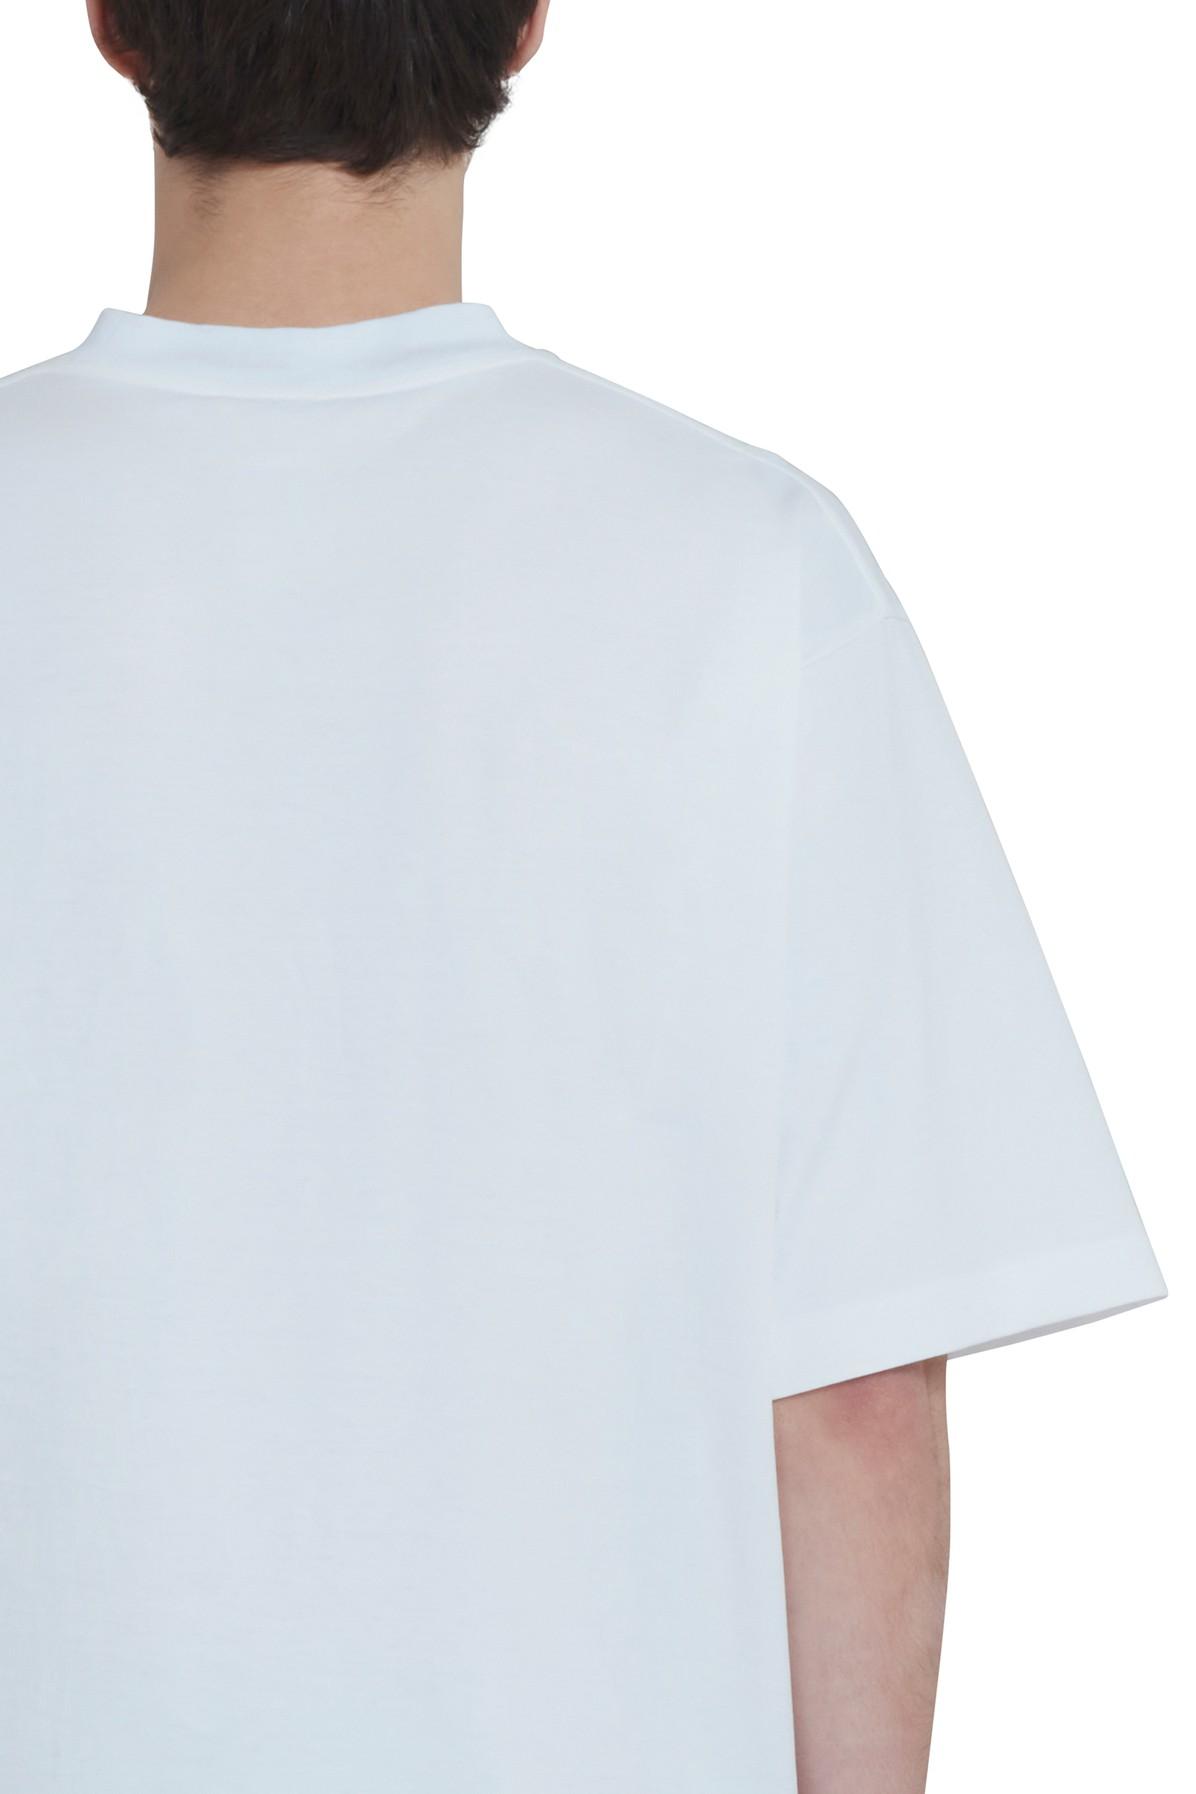 Marni Whirl T-shirt in White for Men | Lyst Canada